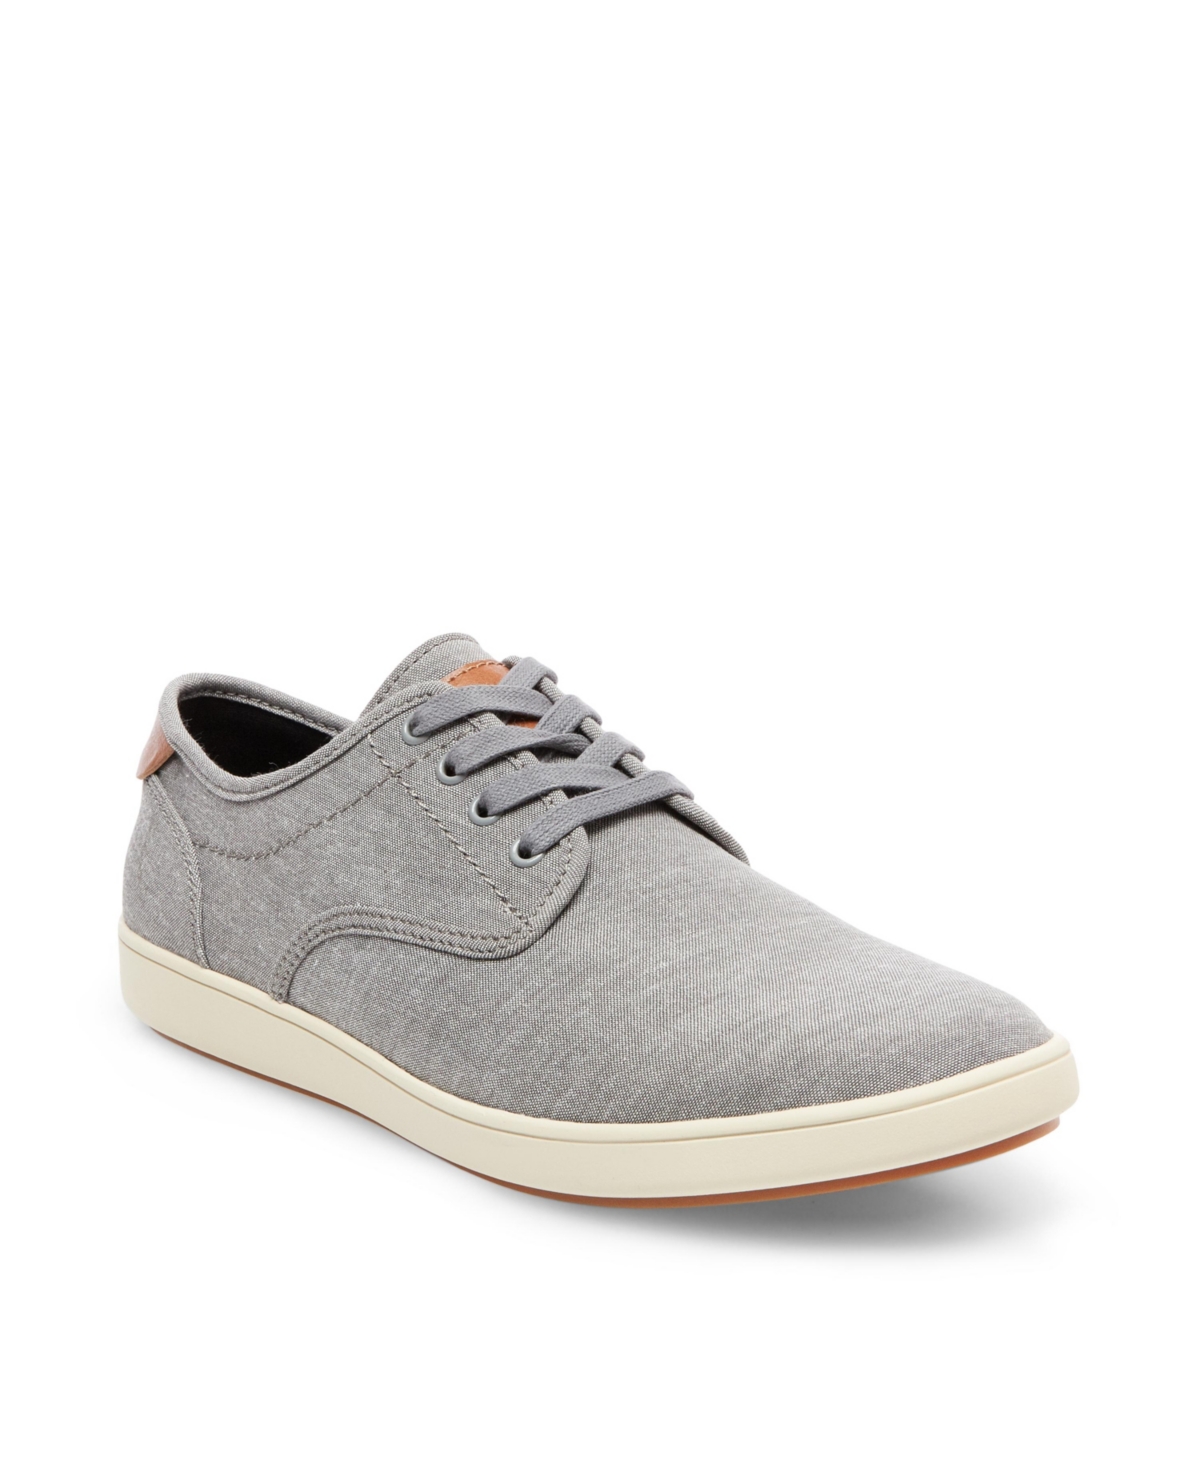 Men's Fenta Fashion Lace-Up Sneakers - Gray Fabric